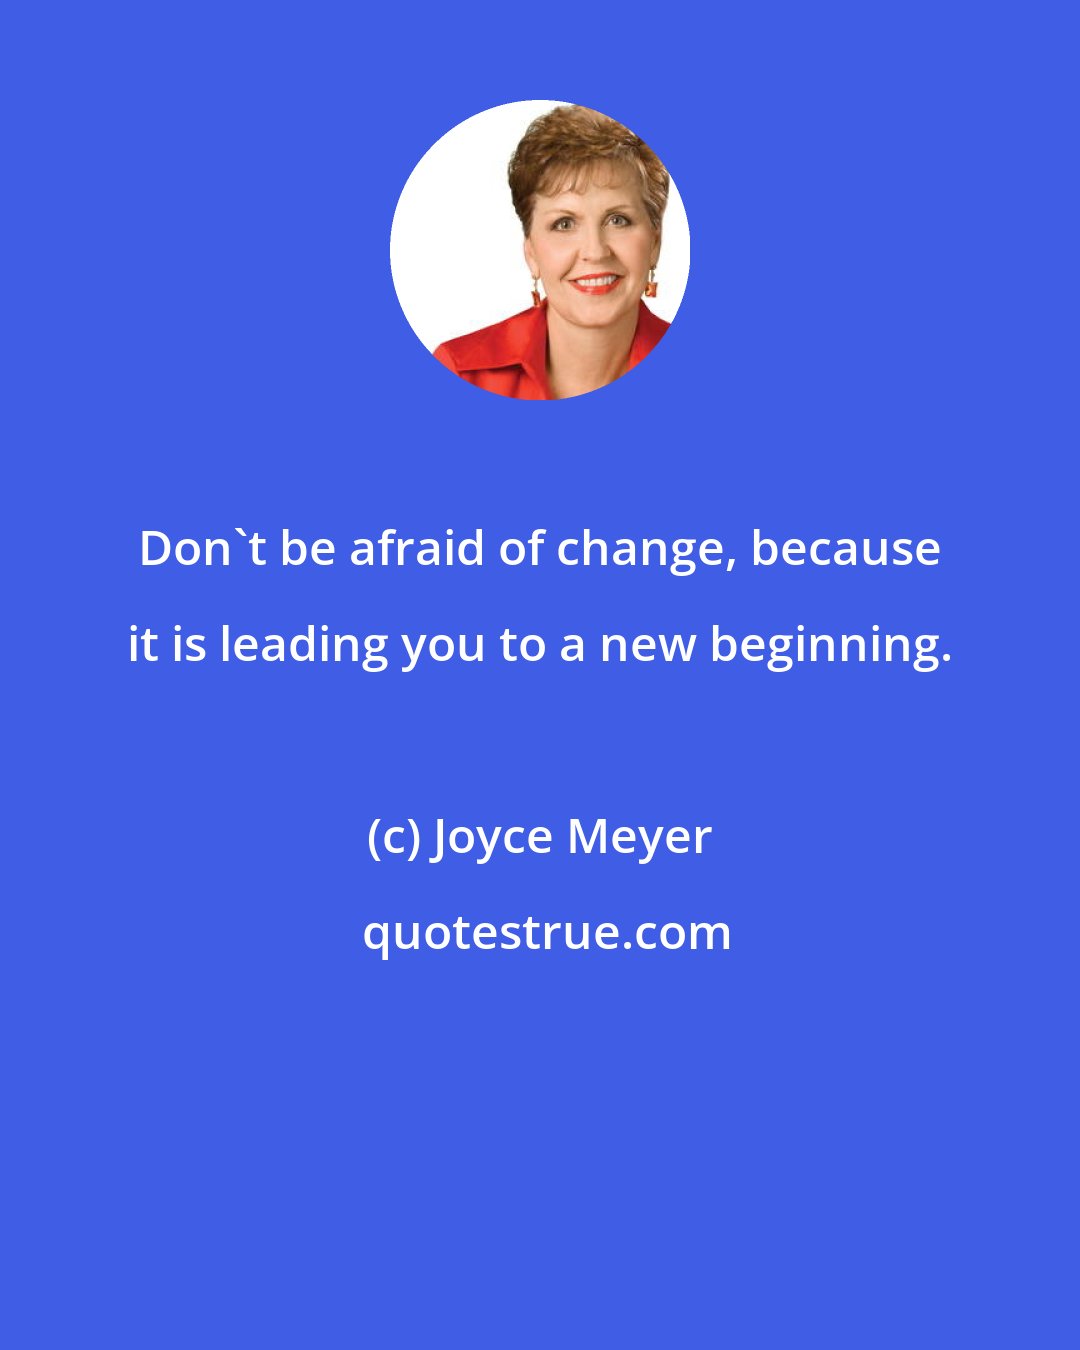 Joyce Meyer: Don't be afraid of change, because it is leading you to a new beginning.